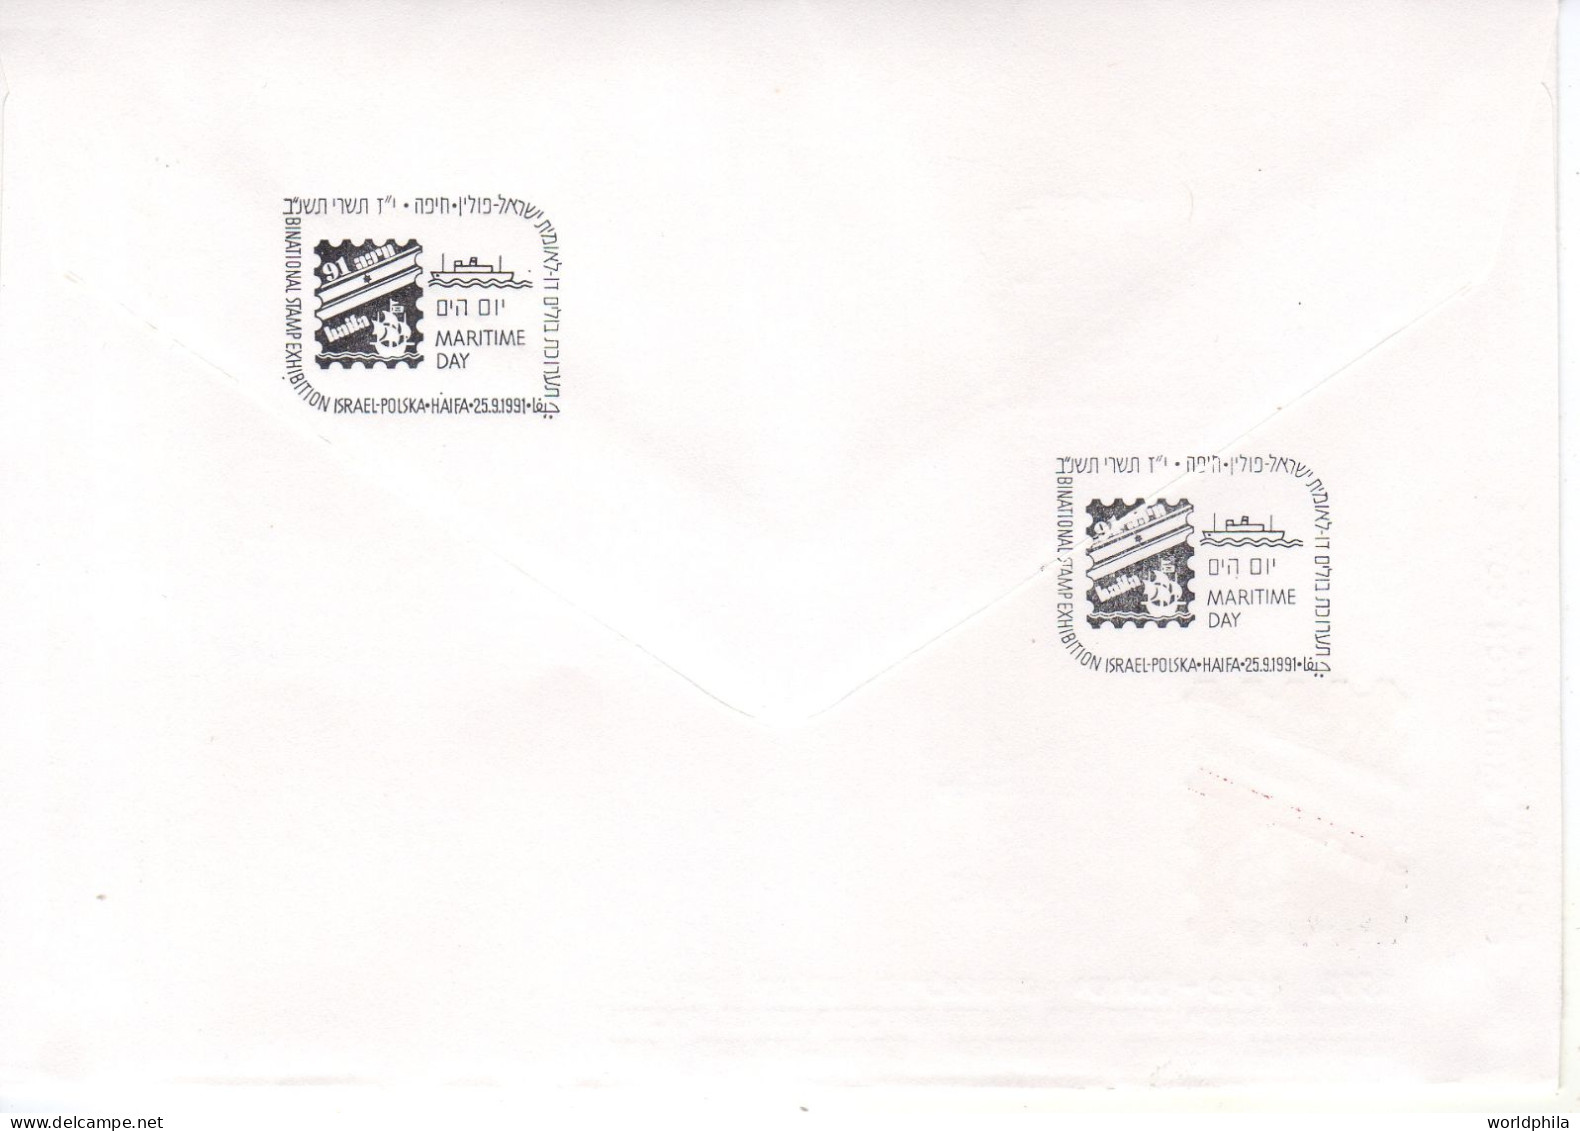 ISRAEL-Poland "Haifa 91" BiNational Stamp Exhibition Cacheted Cover "German Colony" Painting Souvenir Sheet - Covers & Documents